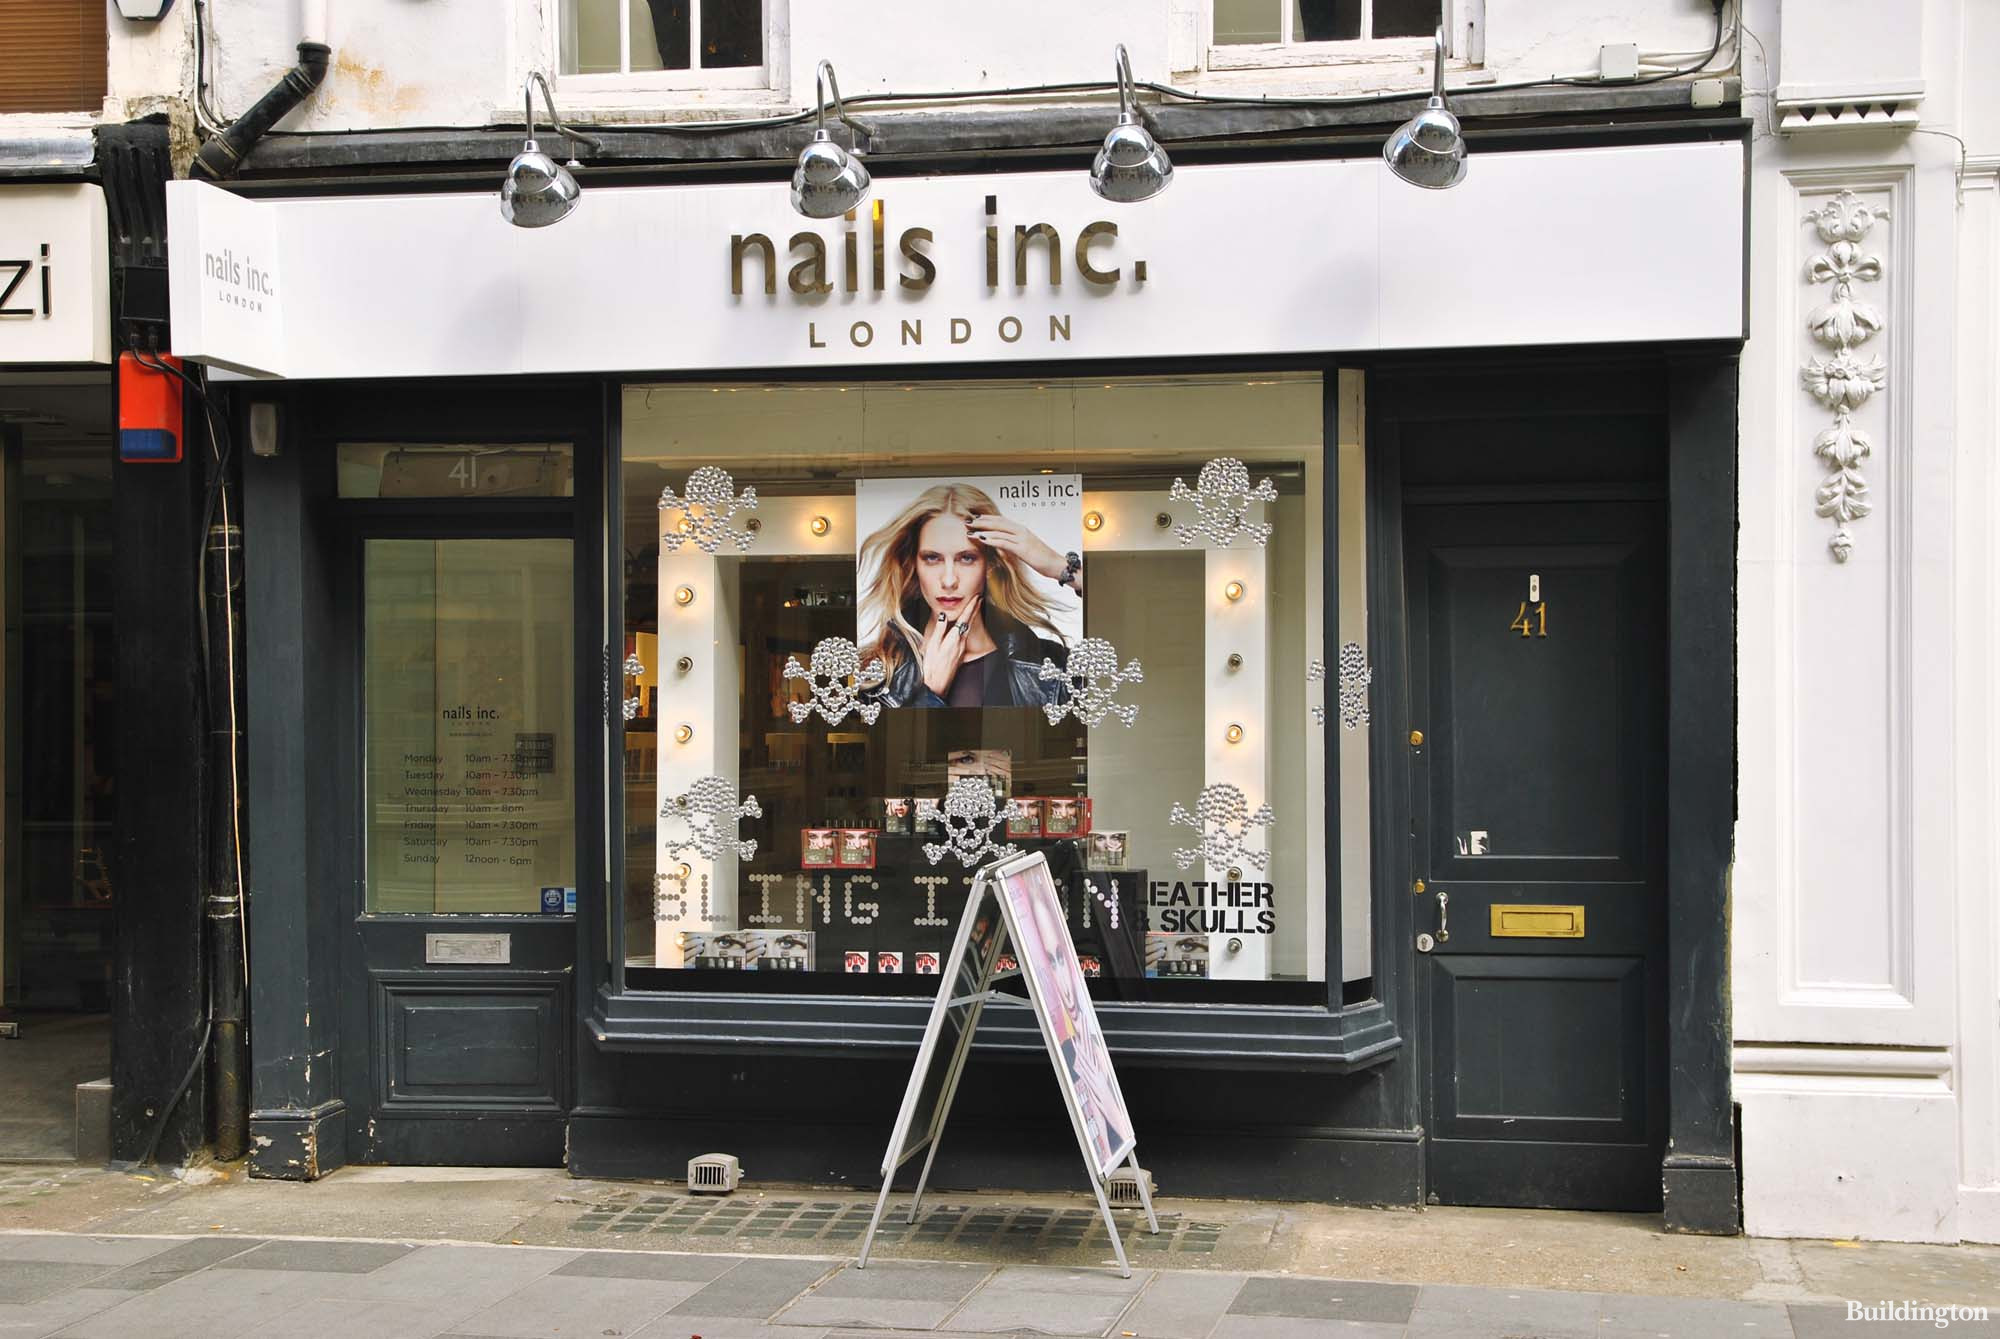 nails inc. London at 41 South Molton Street in Mayfair, London W1.